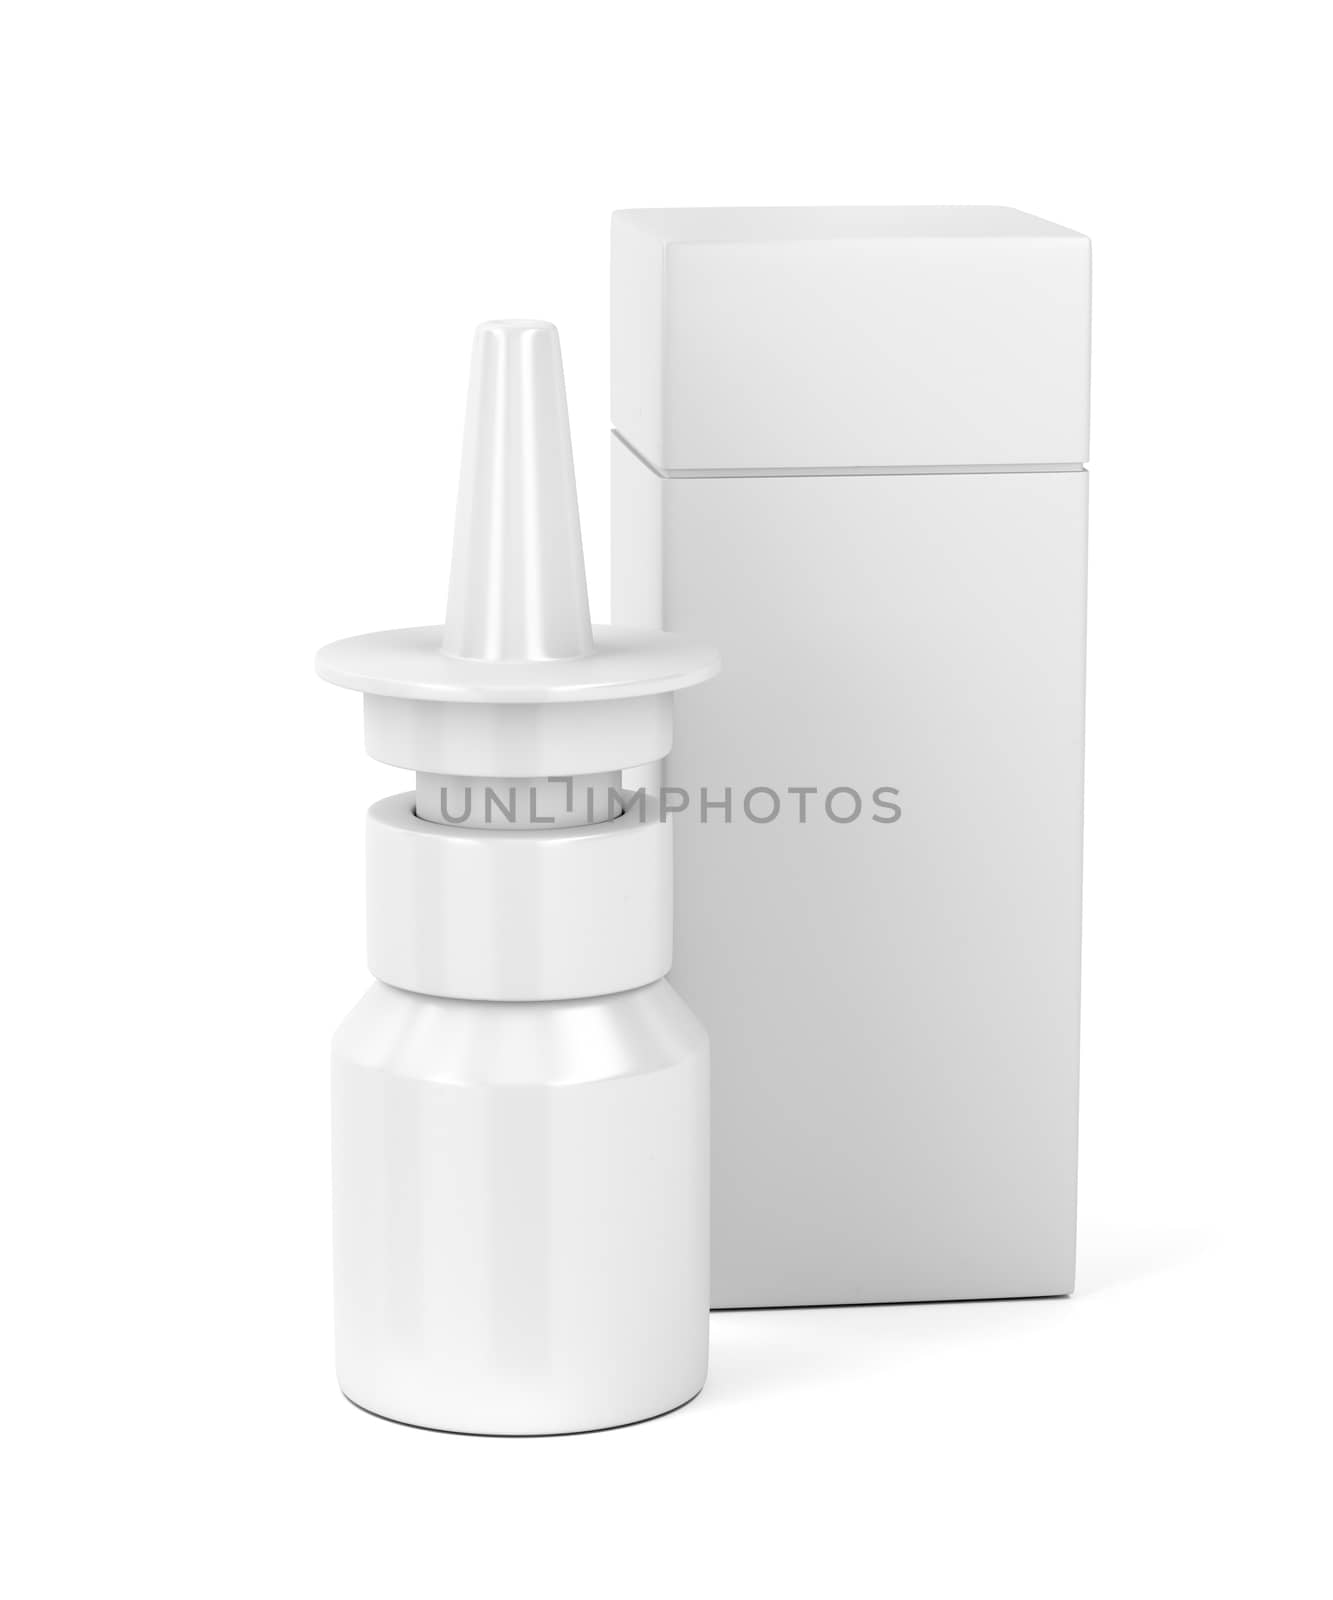 White nasal spray bottle and plastic box by magraphics